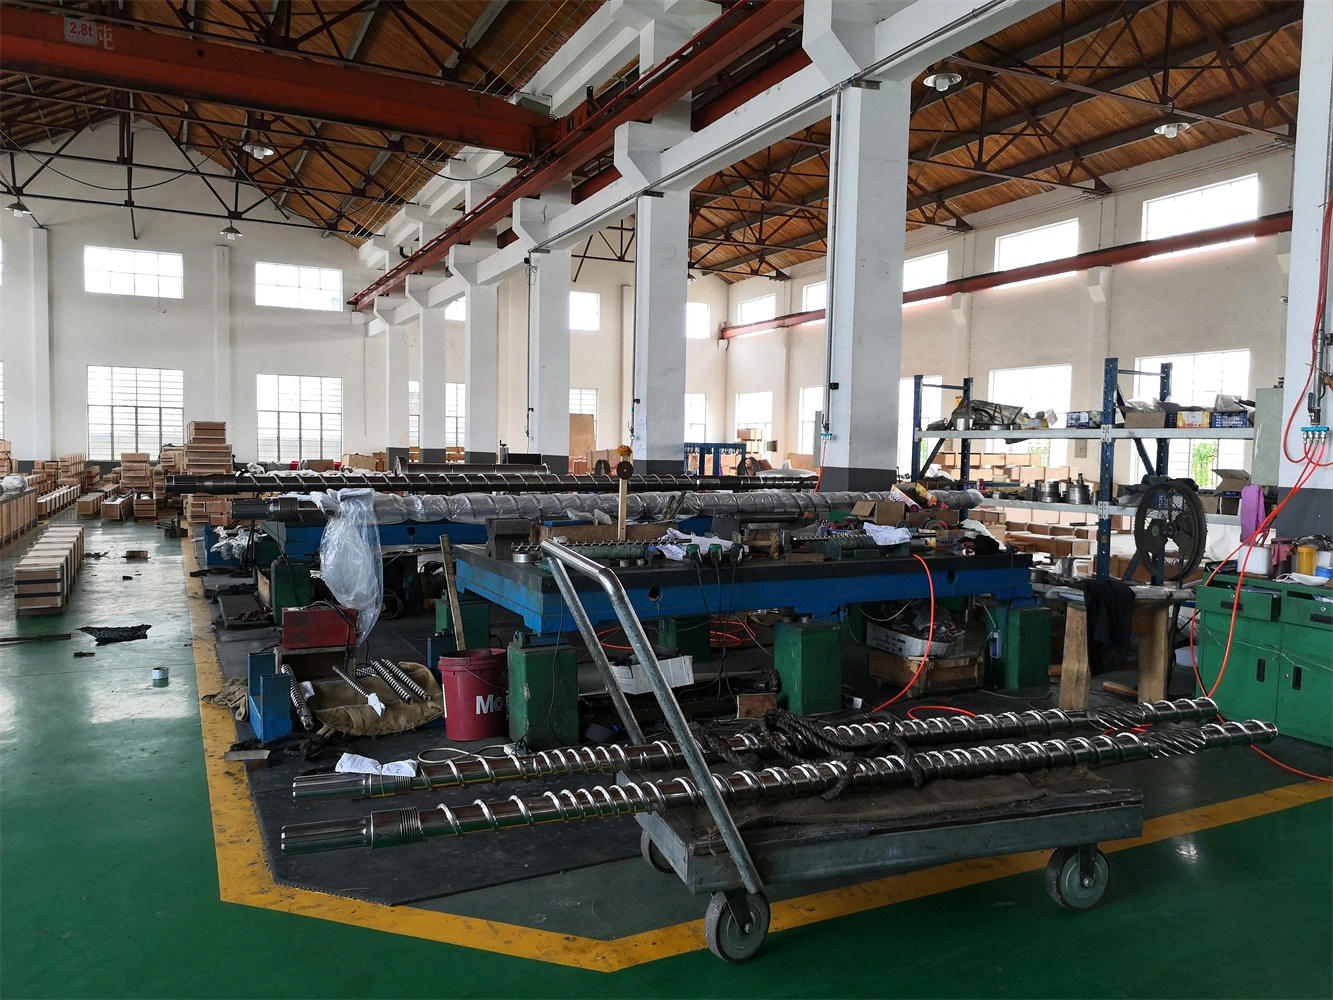 Plastic extruder screw， made in China E.J.S INDUSTRY CO., LTD, has been sold to China and abroad for 30 years.